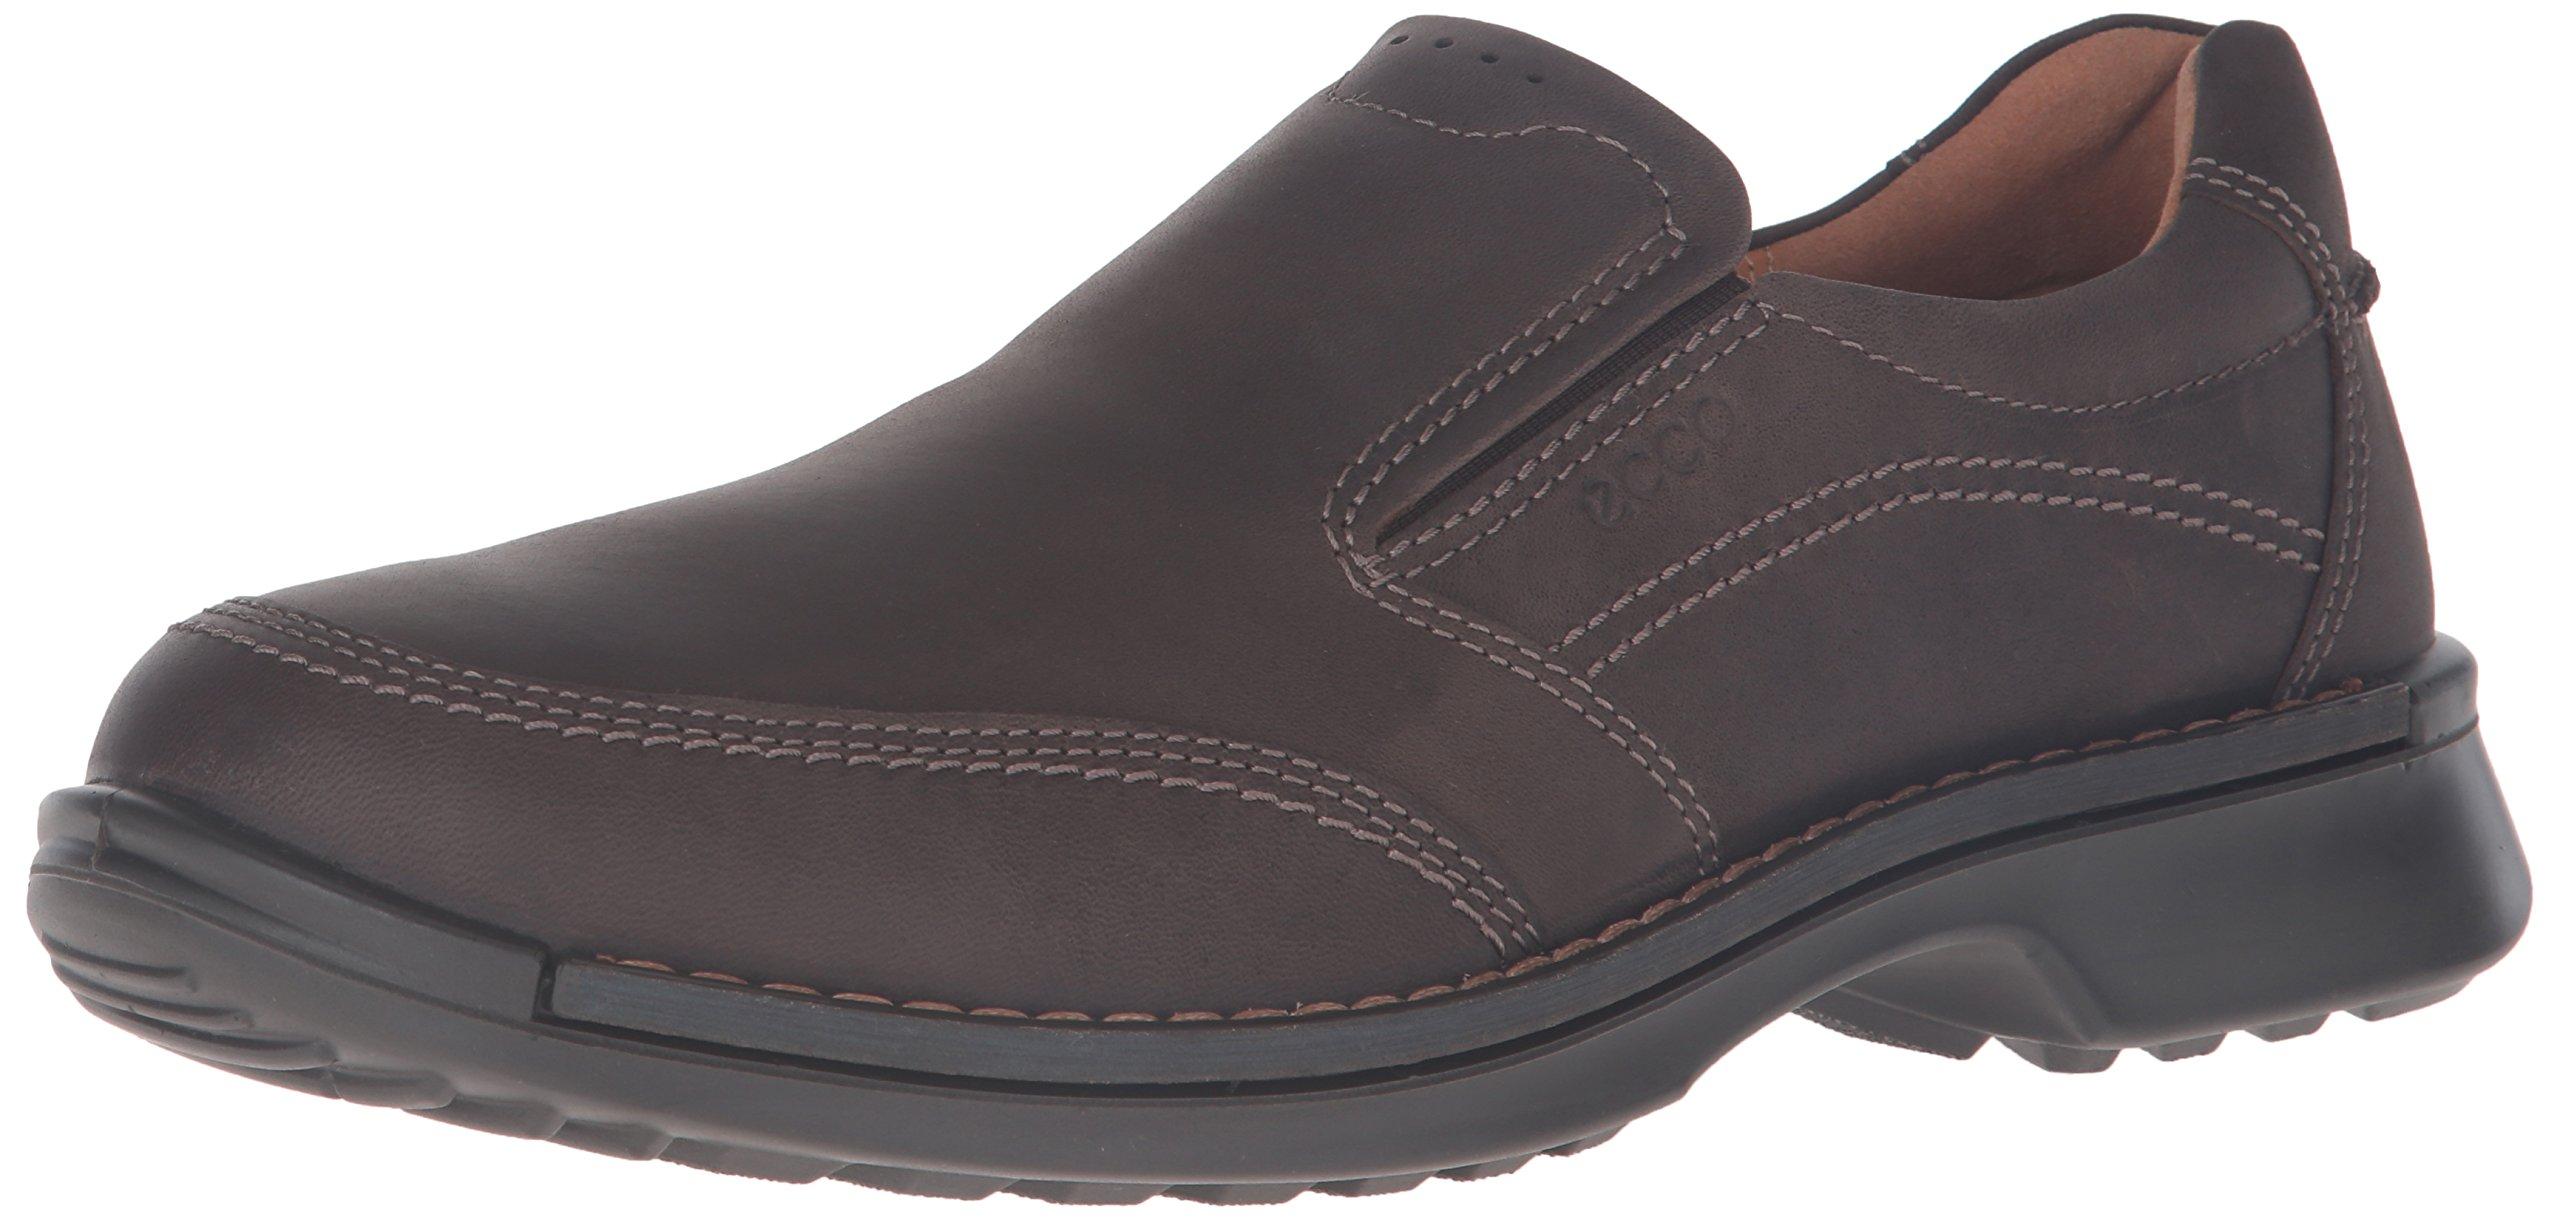 Ecco Leather Fusion Ii Slip On Slip-on Loafer for Men - Save 6% - Lyst